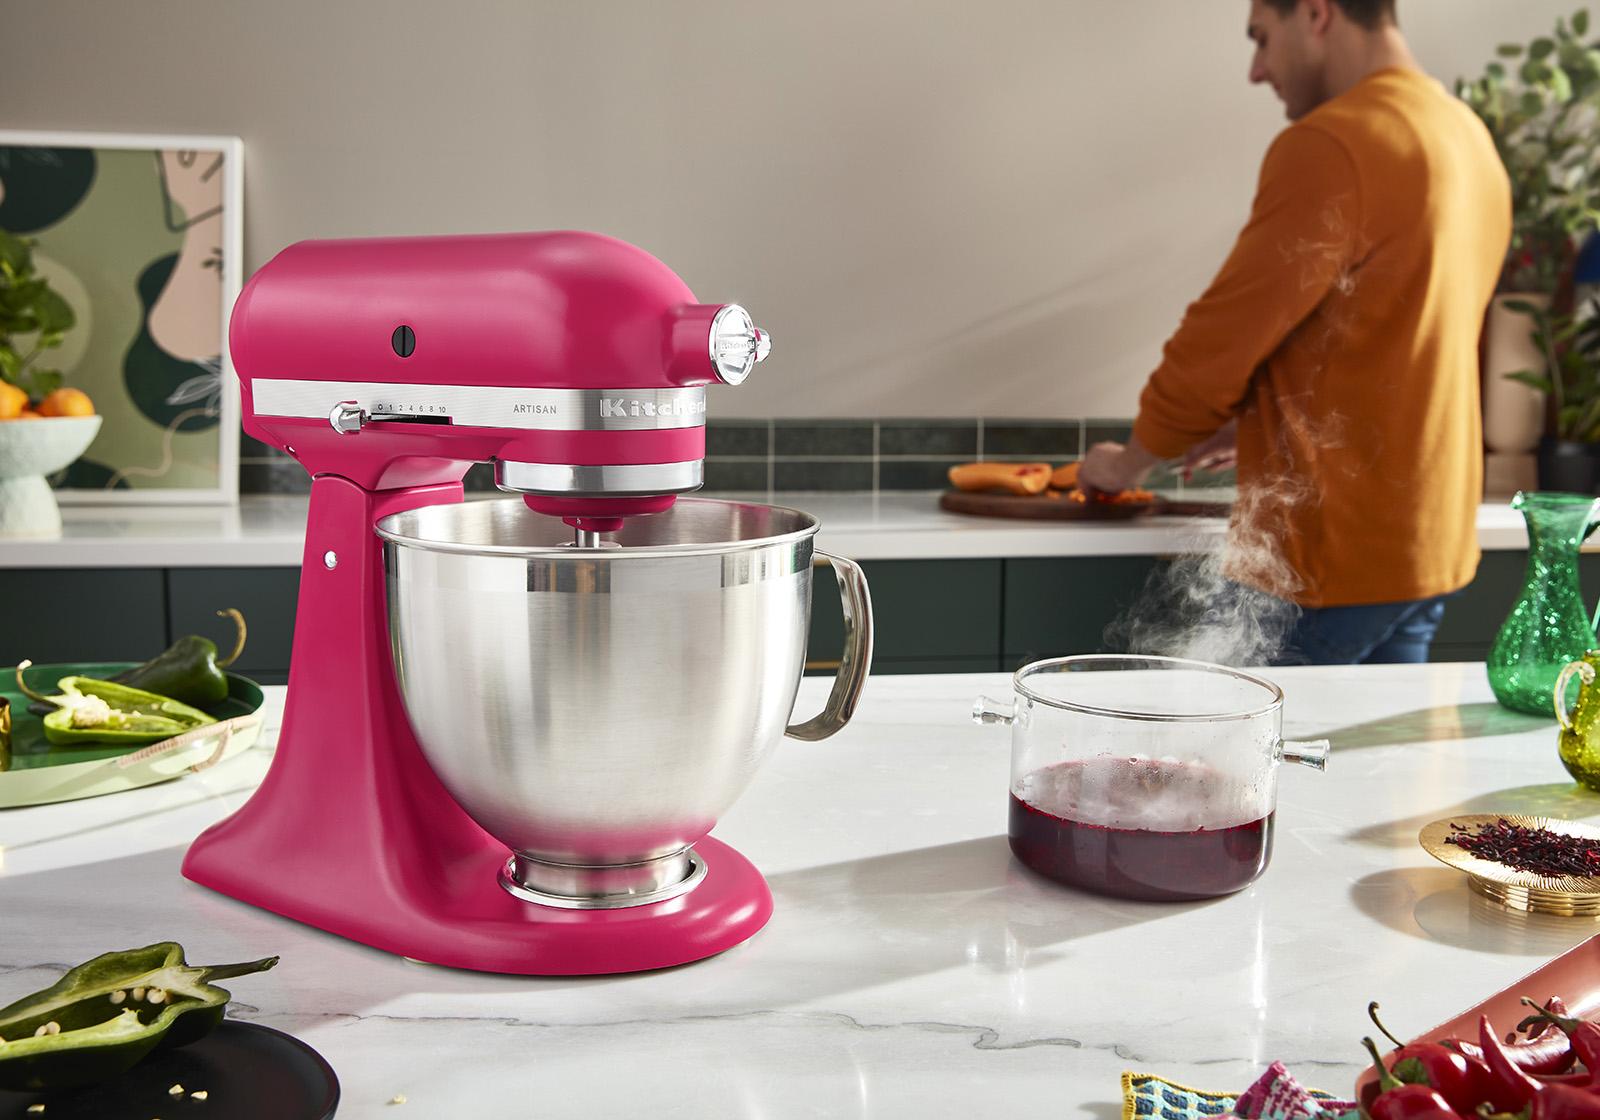 KitchenAid names Hibiscus of year Guides its Calendar - Restaurant Color the 2023 as